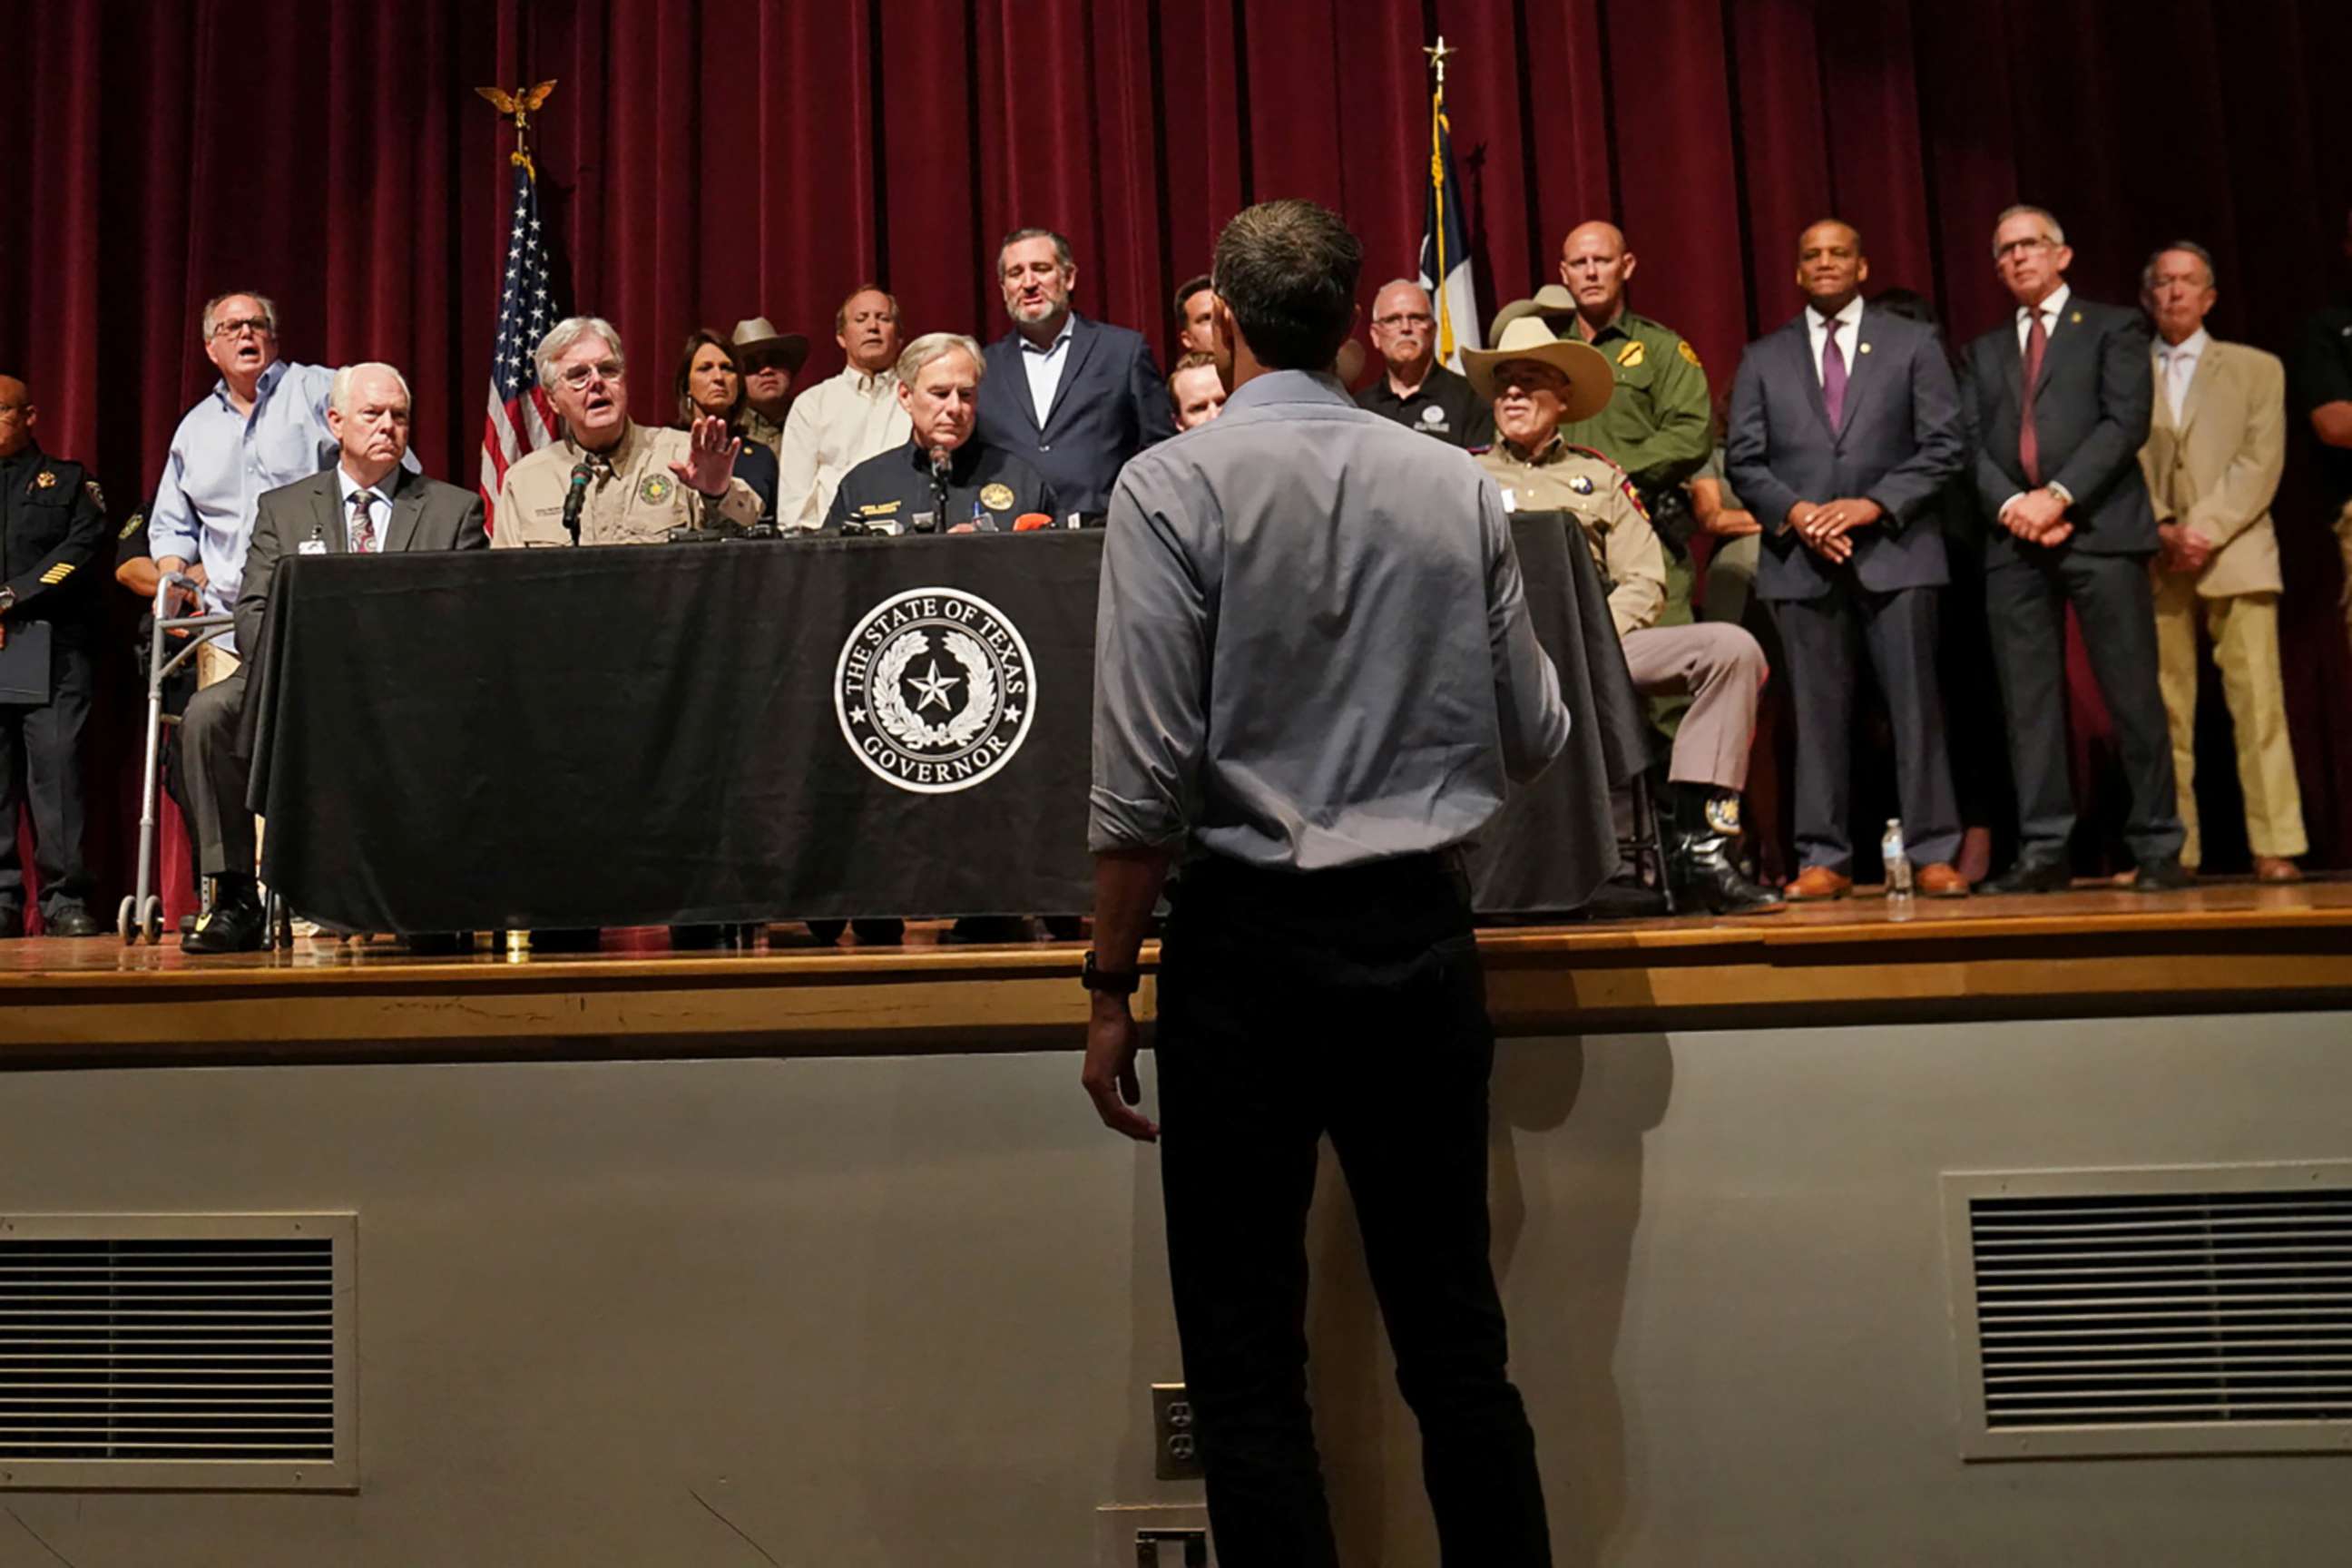 PHOTO: Texas Democratic gubernatorial candidate Beto O'Rourke disrupts a press conference held by Governor Greg Abbott the day after a gunman killed 19 children and two teachers at Robb Elementary school in Uvalde, Texas, May 25, 2022. 